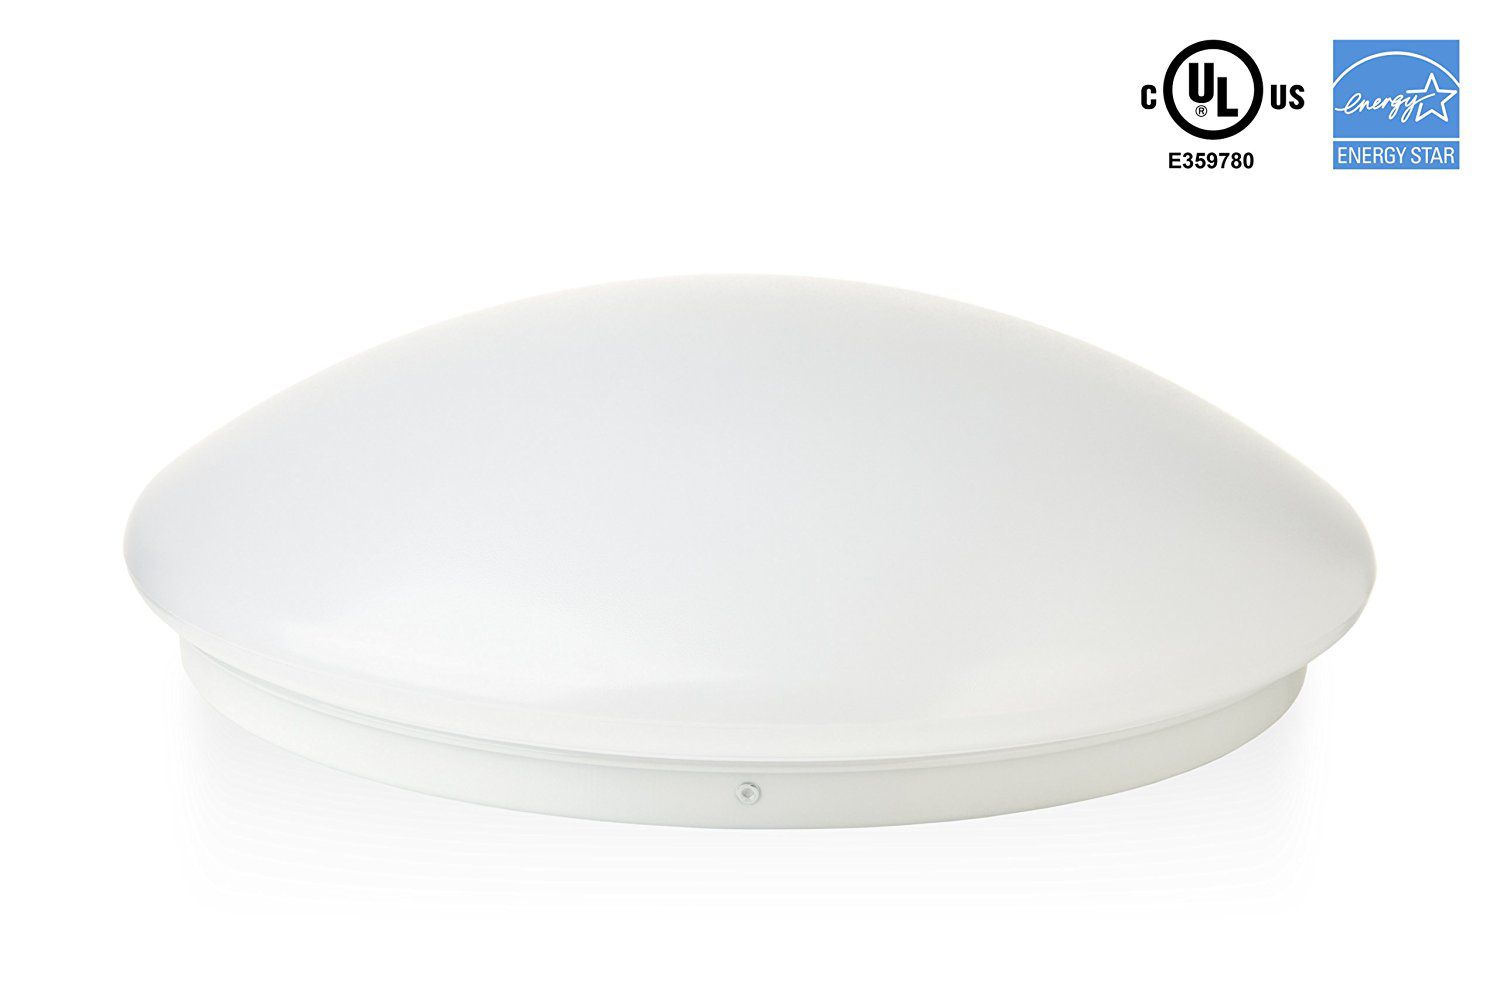 Hyperikon LED Flush Mount Ceiling Light, 16", 35W (150W equivalent), 3100lm, 4000K (Daylight Glow), 120° Beam Angle, 120-240V, UL and ENERGY STAR Listed, 16-Inch Flush Mount, Instant-On